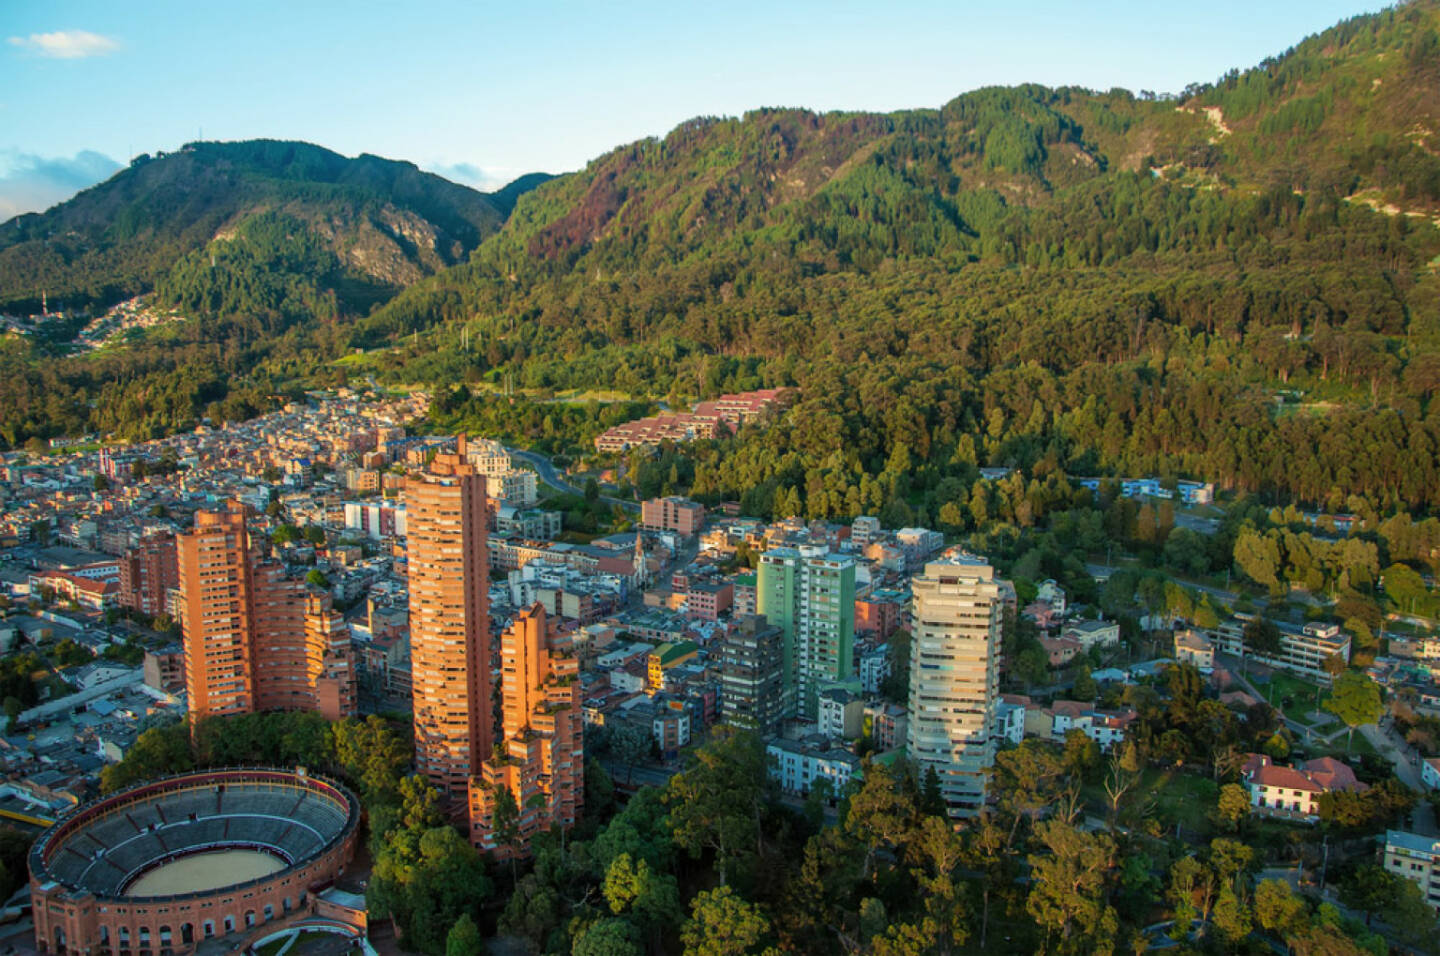 Bogota, Kolumbien, http://www.shutterstock.com/de/pic-121080436/stock-photo-a-view-of-the-center-of-bogota-with-the-andes-in-the-background.html 